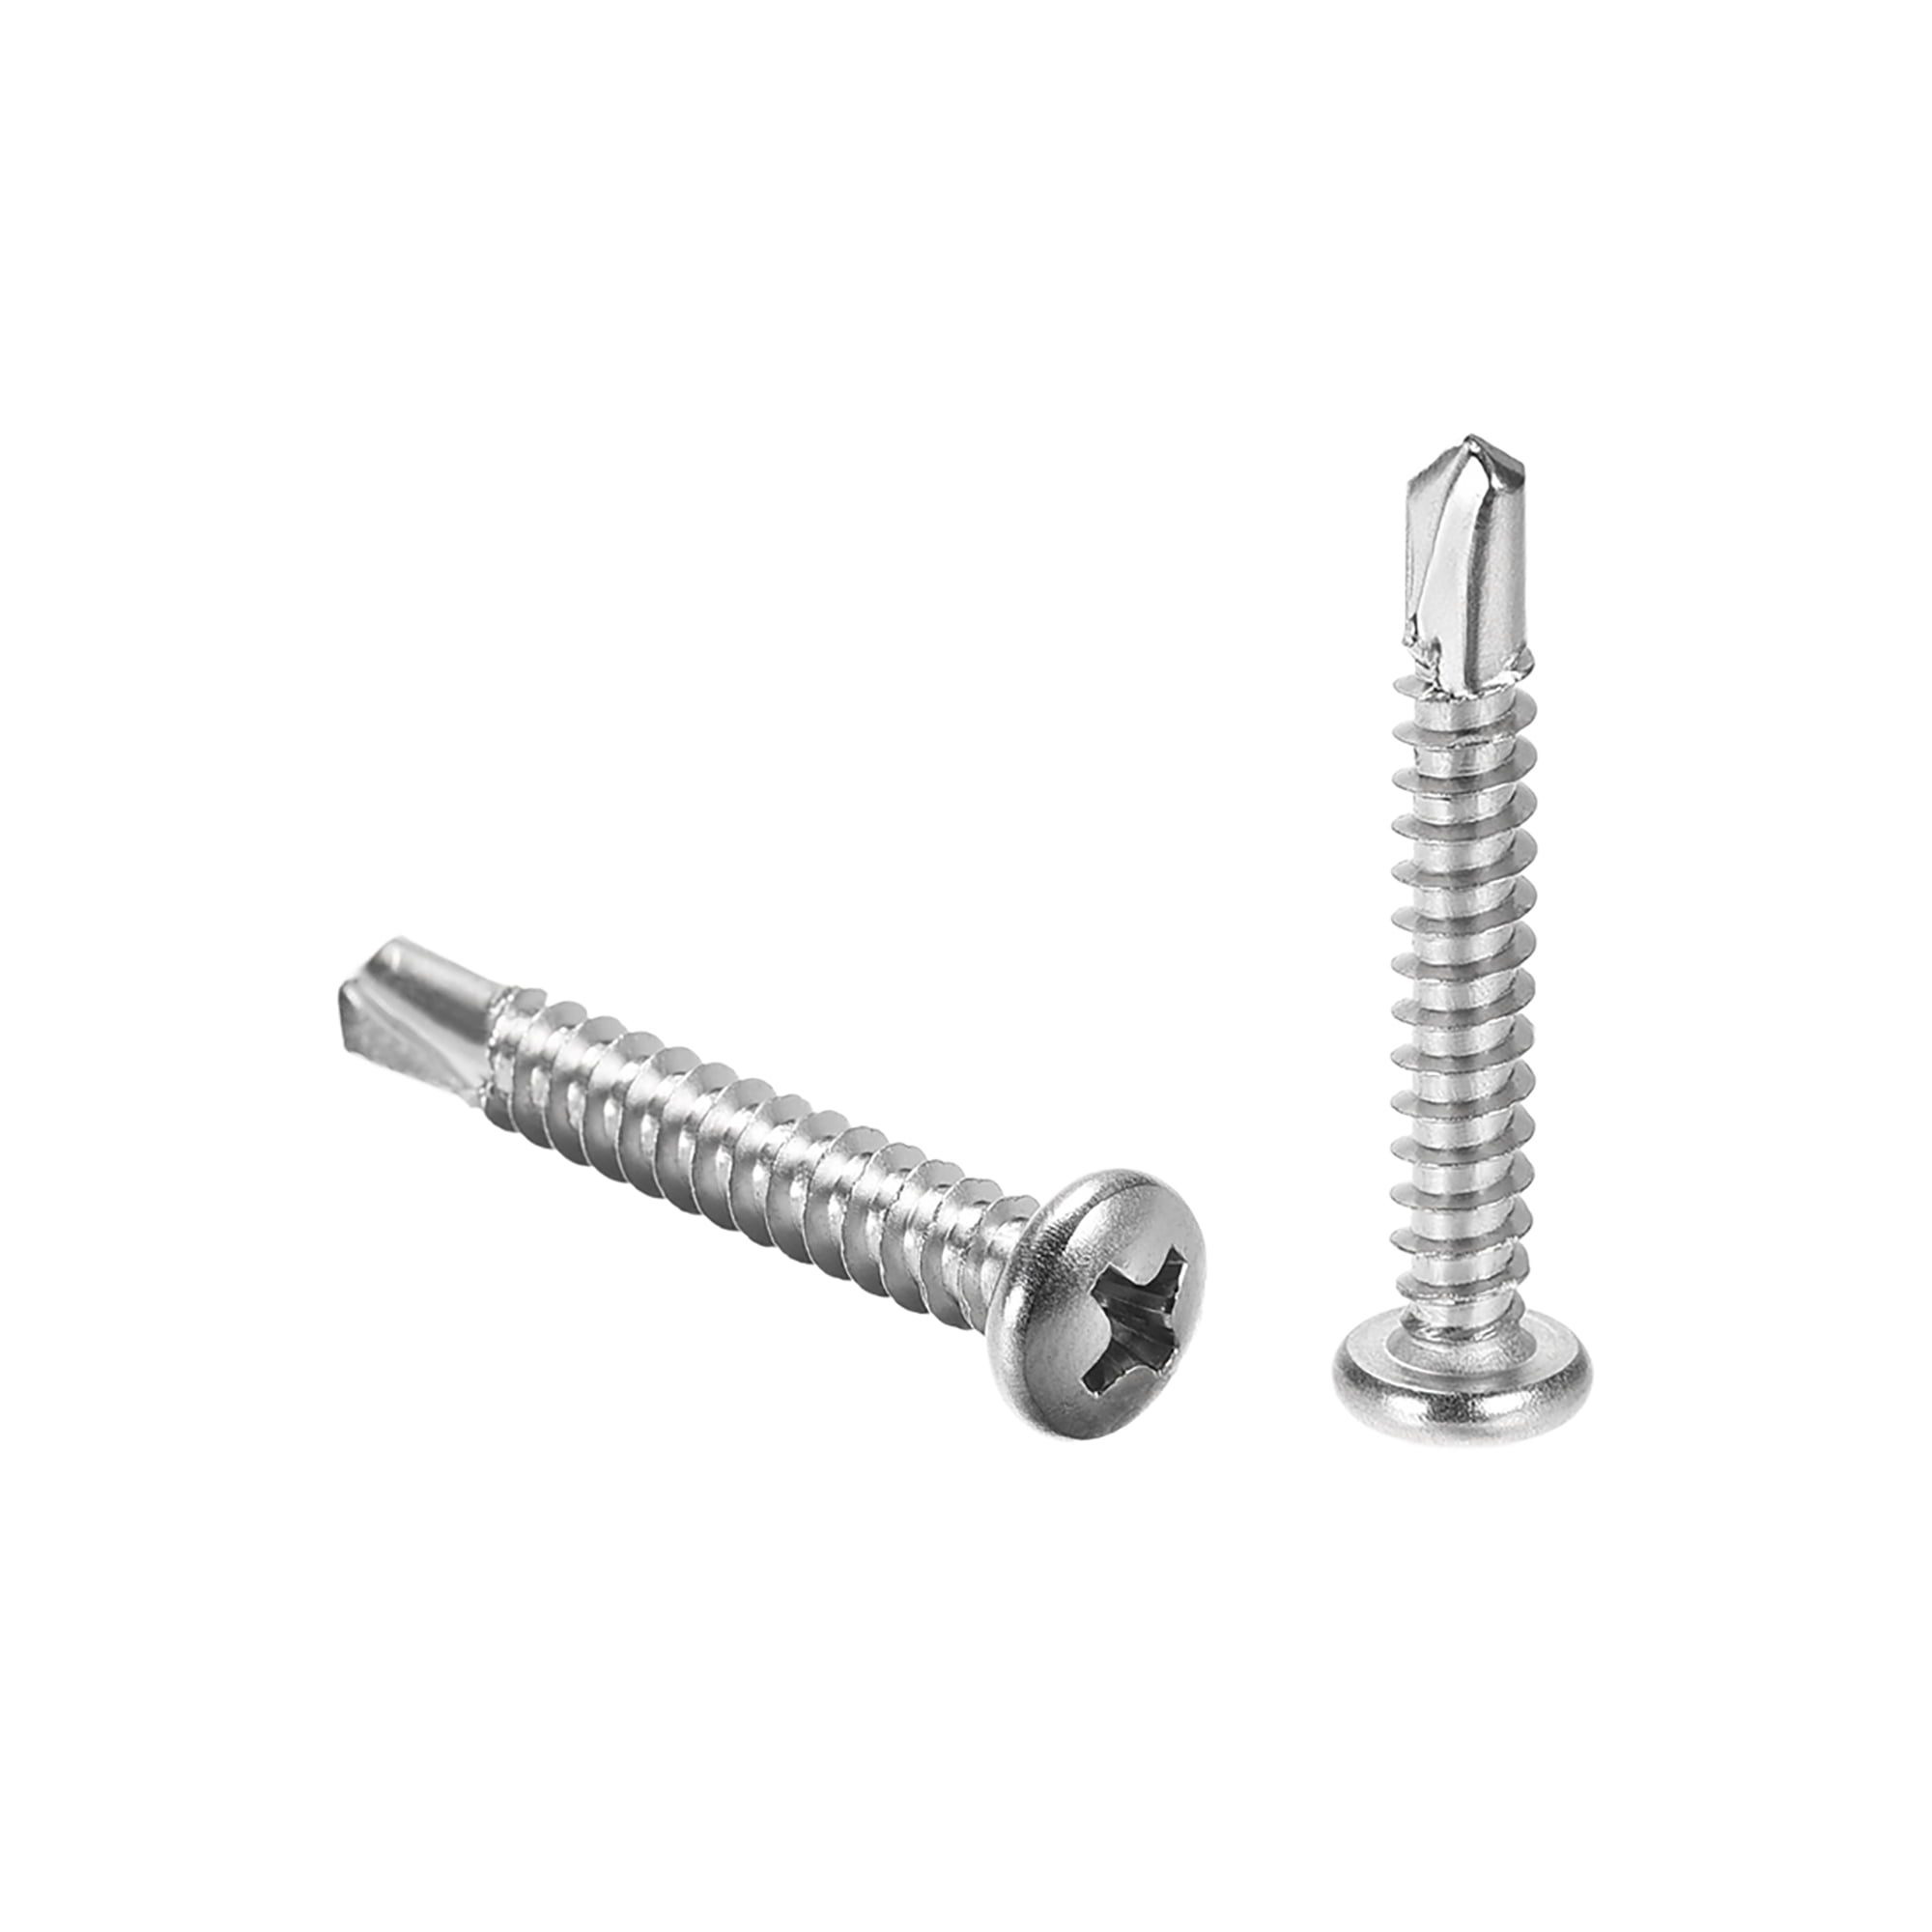 Details about   100pc Stainless Steel Self Drilling Tapping Screws #10 x 1 1/2" Phillips Pan 